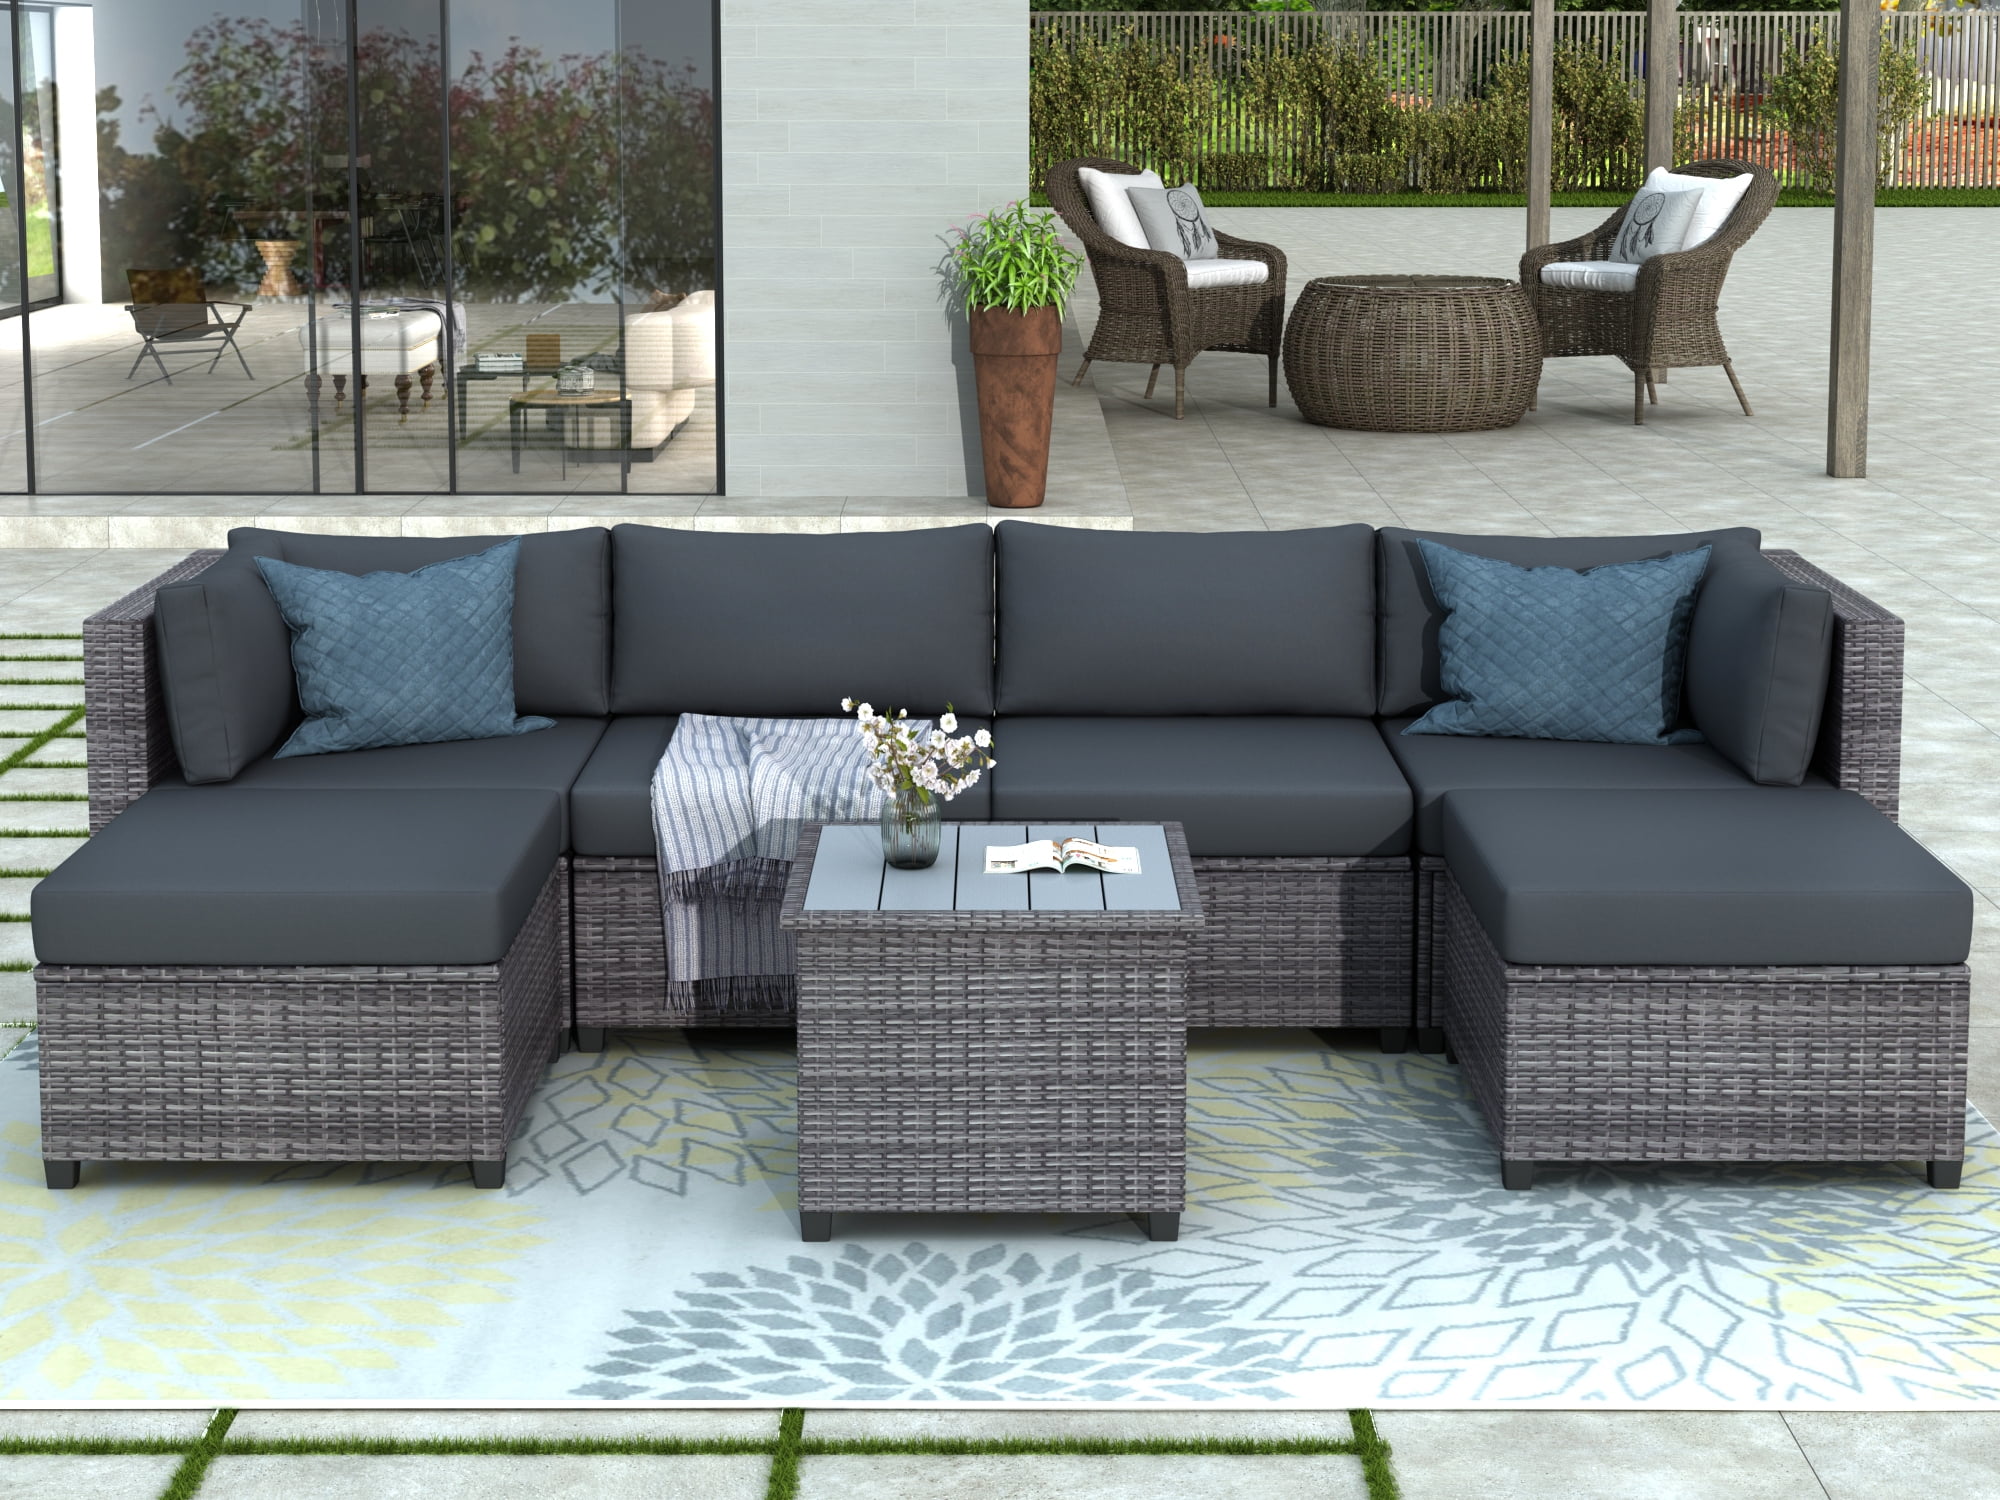 7 Piece Patio Furniture Set with 4 Rattan Wicker Chairs, 2 Ottoman, Coffee Table, All-Weather ...